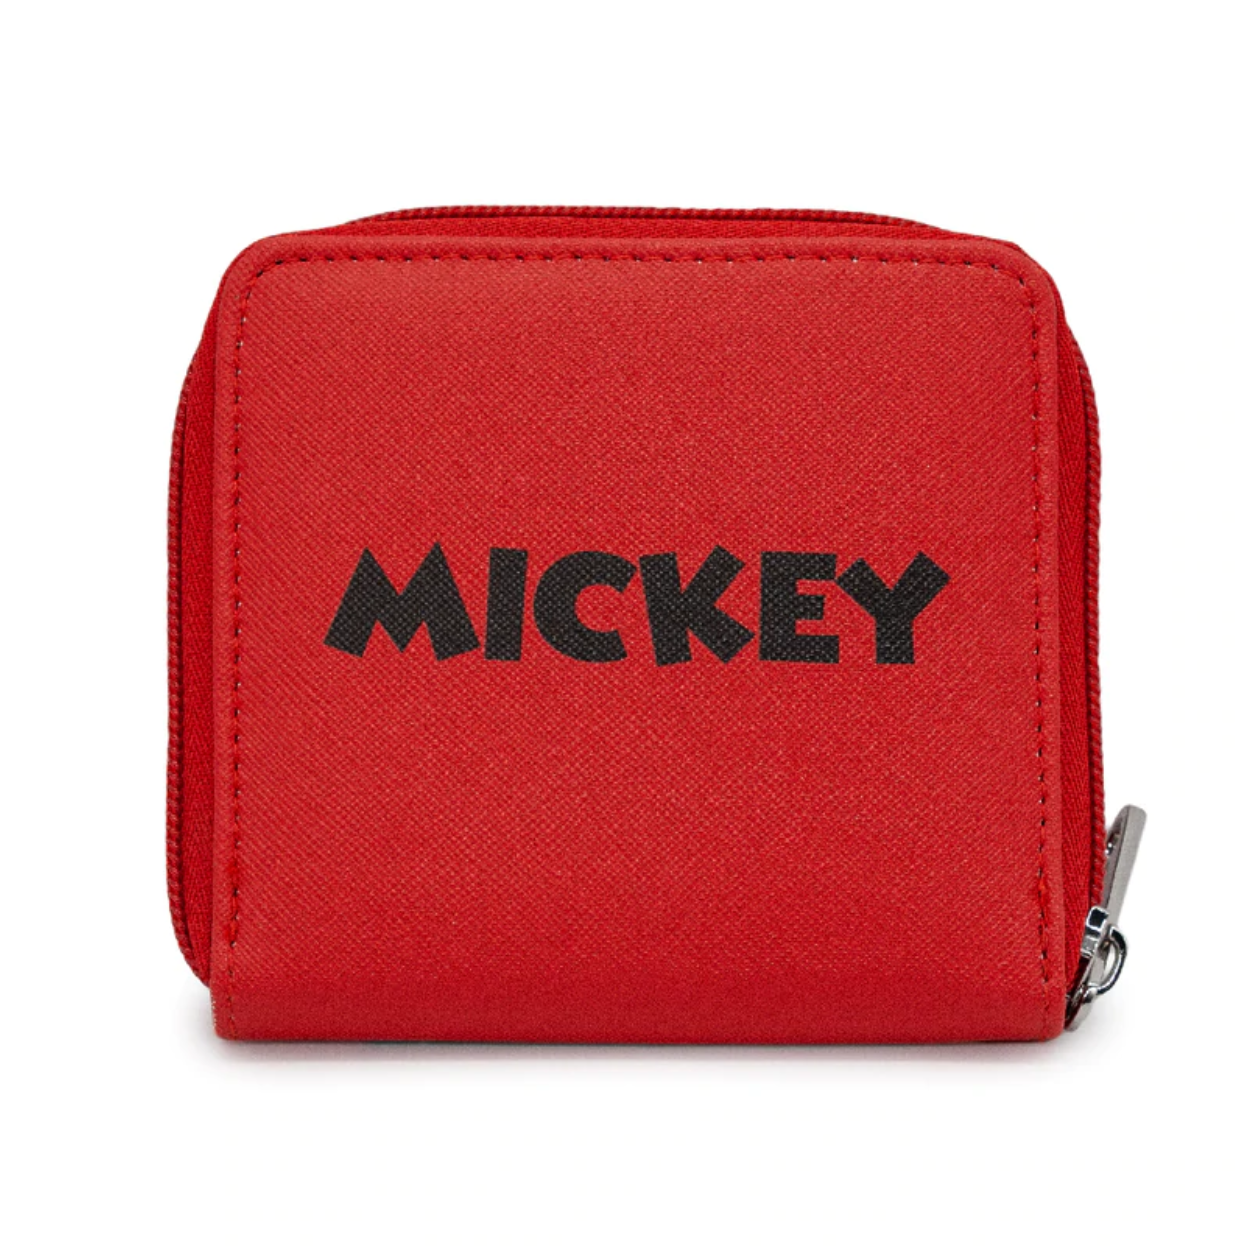 Disney Mickey Mouse Expression Zip Around Wallet.   Available at Blue Culture Tees! 